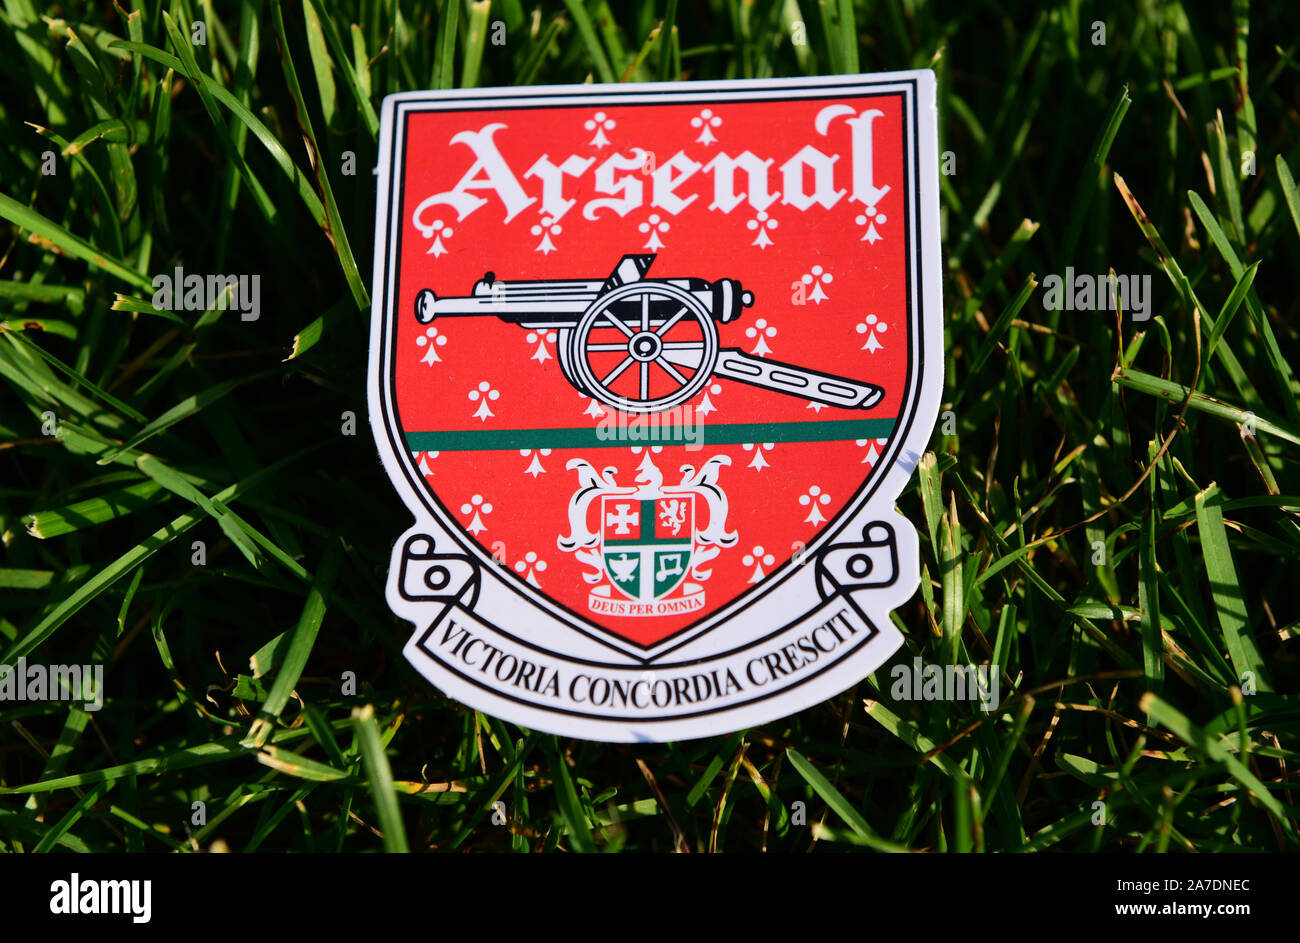 September 6, 2019 Istanbul, Turkey. The emblem of the English football club Arsenal London League on the green grass of the football field. Stock Photo